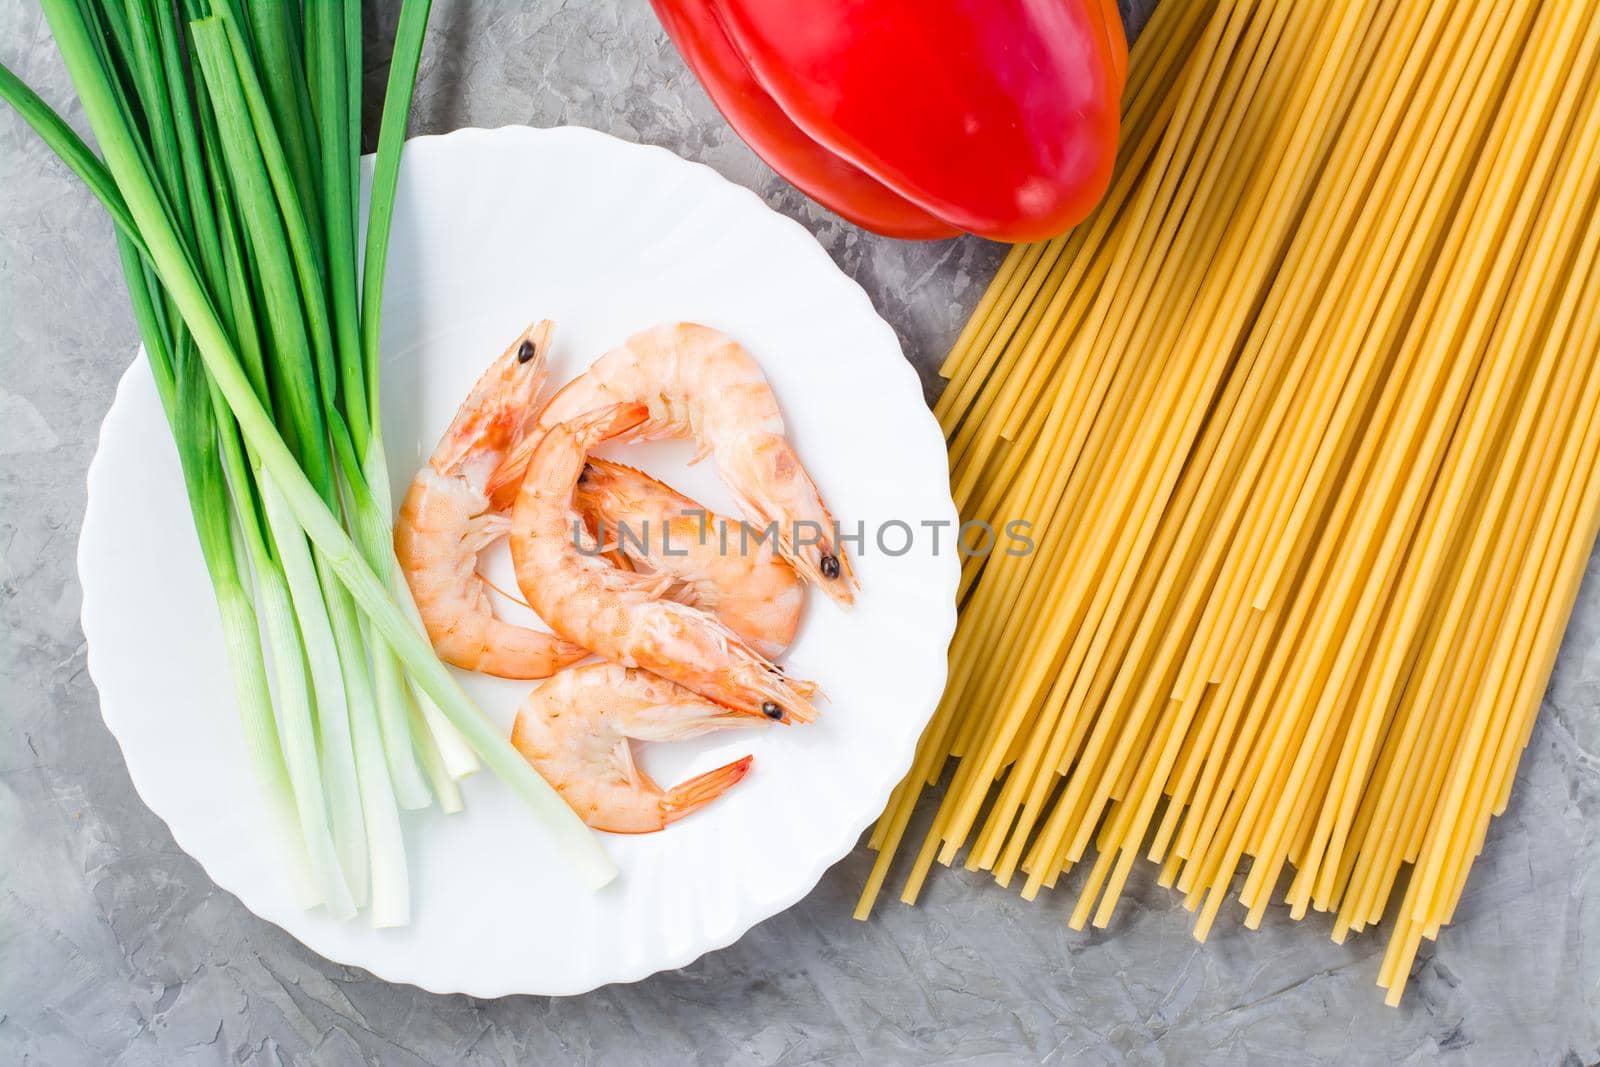 Ingredients for making udon and wok noodles with shrimps, peppers and onions on the table. Chinese food. Top view